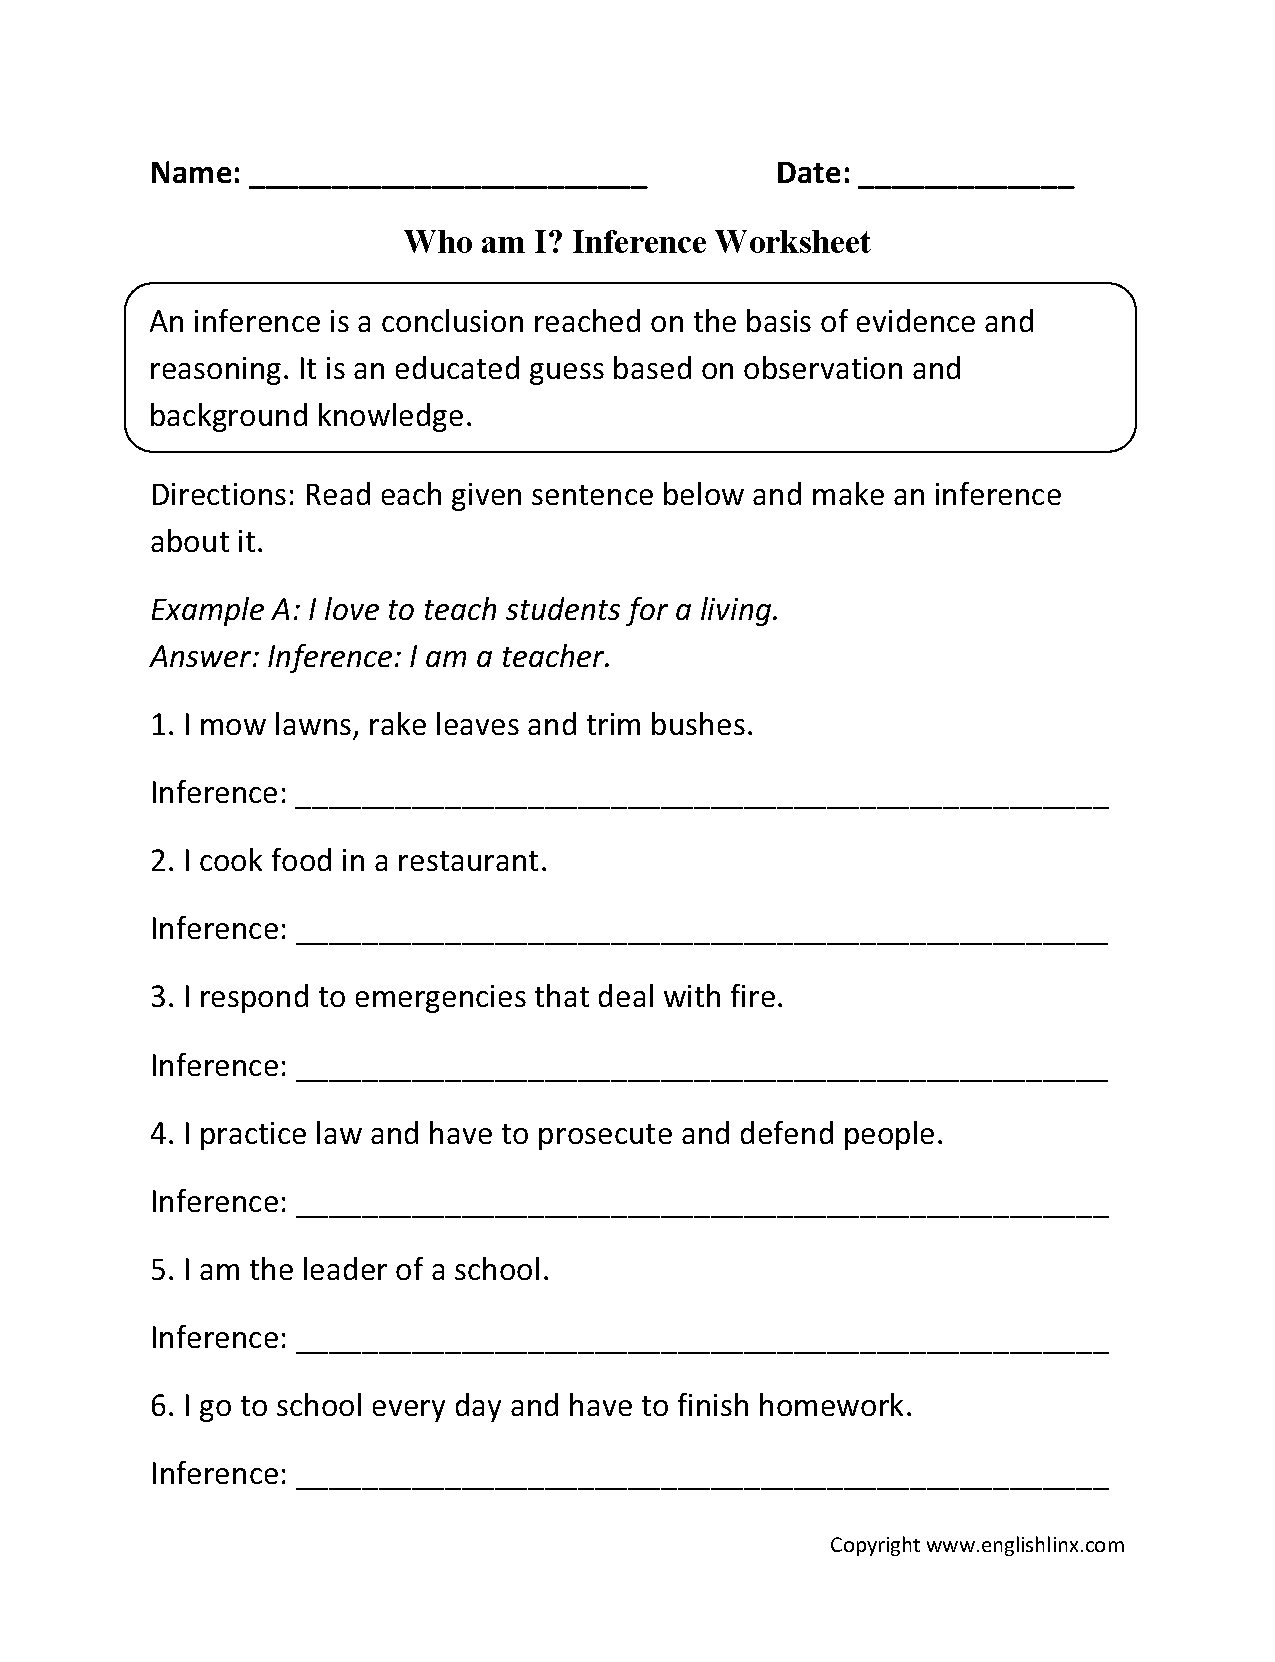 Who Am I? Inference Worksheets (With Images) | Inferring